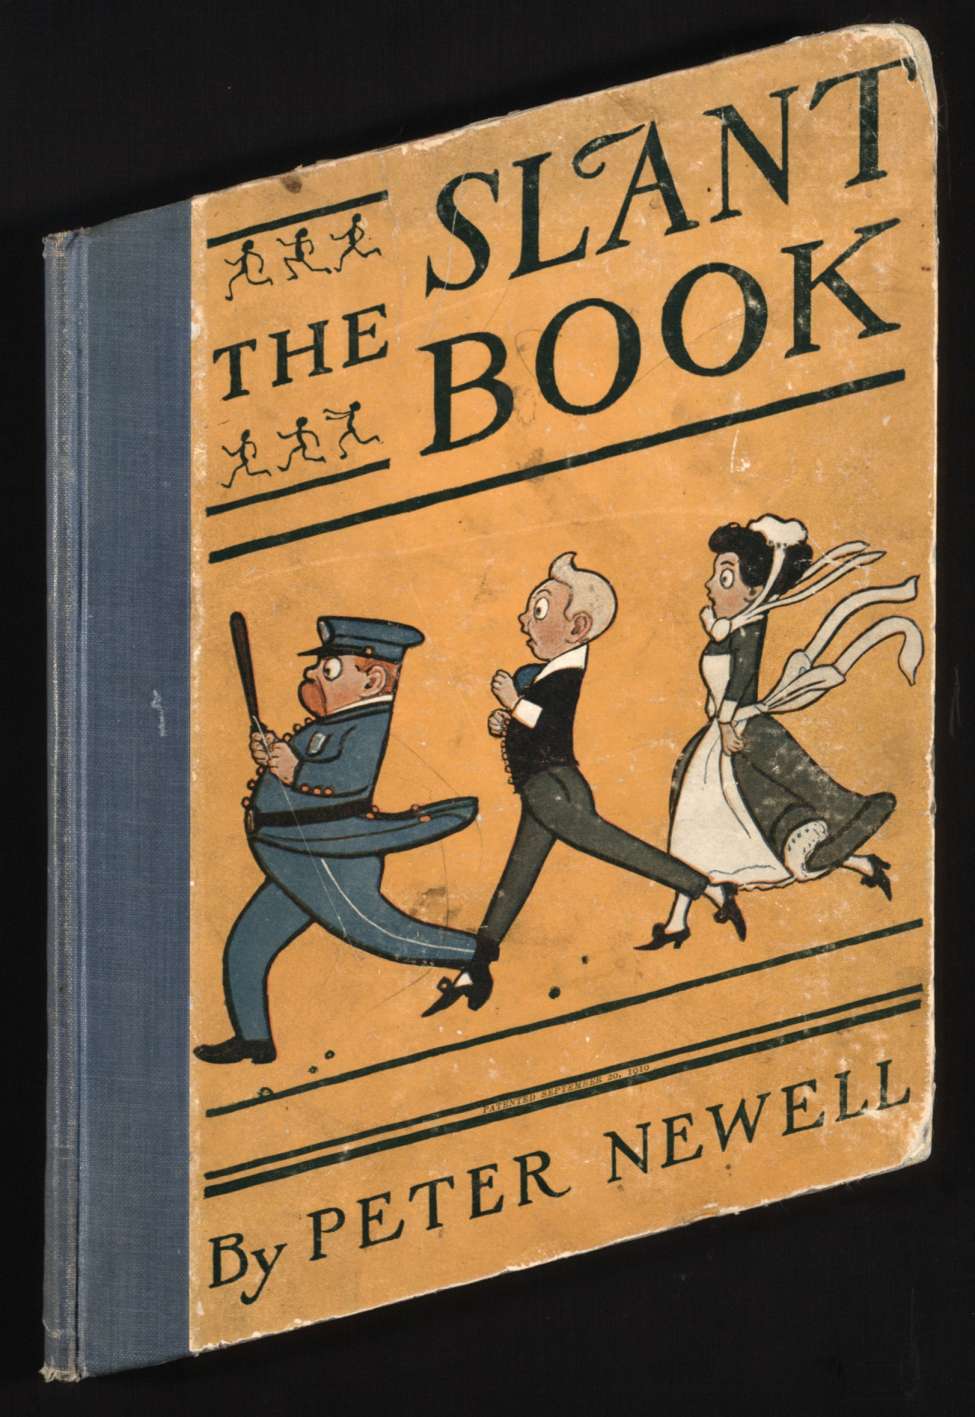 Book Cover For The Slant Book - Peter Newell